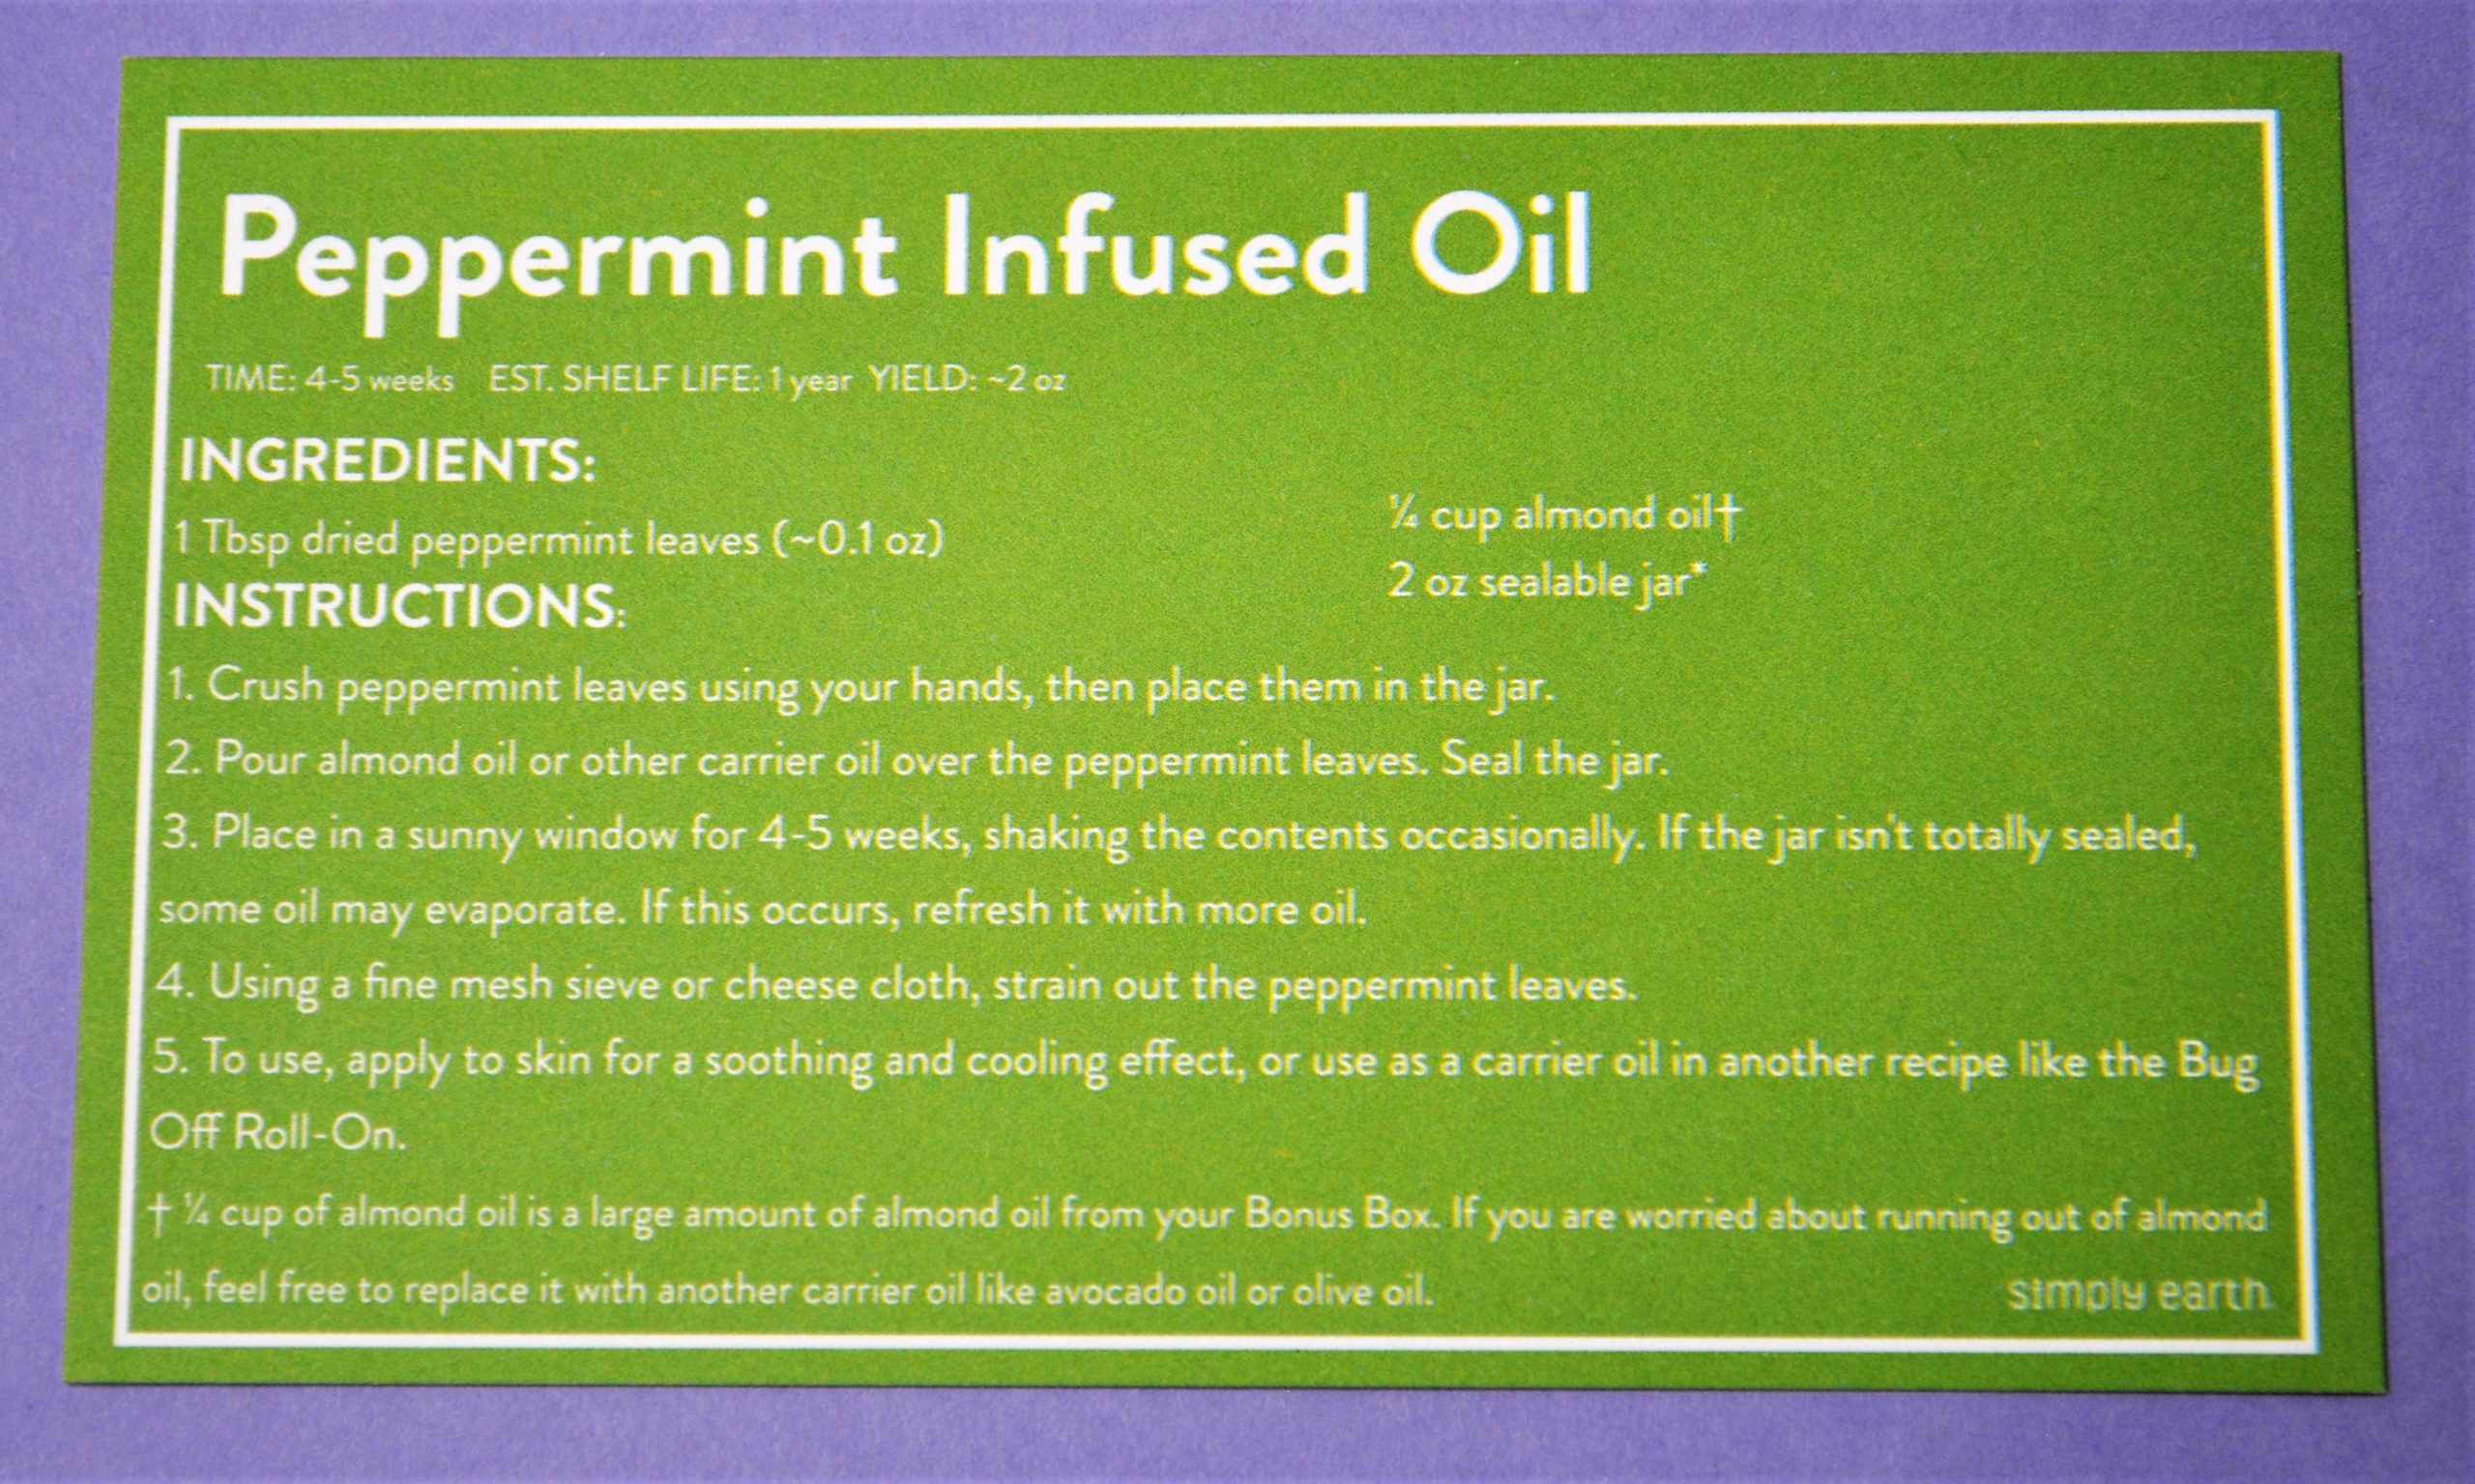 Simply Earth Peppermint Infused Oil Recipe